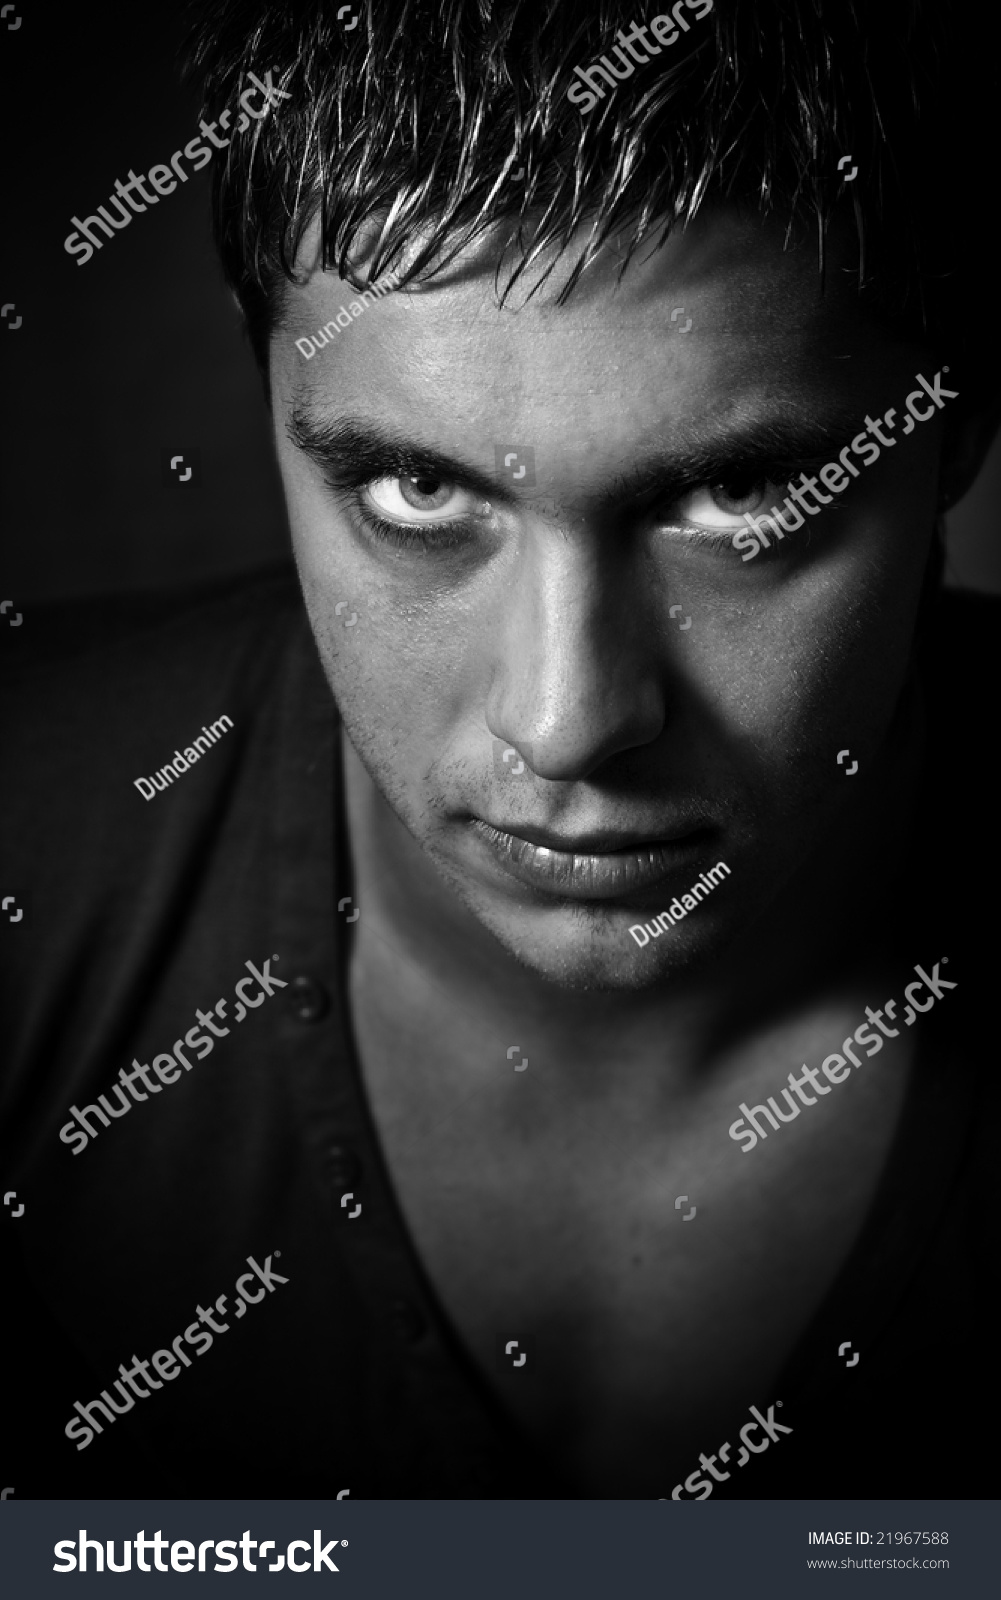 Evil Man Scary Eyes Looking Shadow Stock Photo 21967588 - Shutterstock